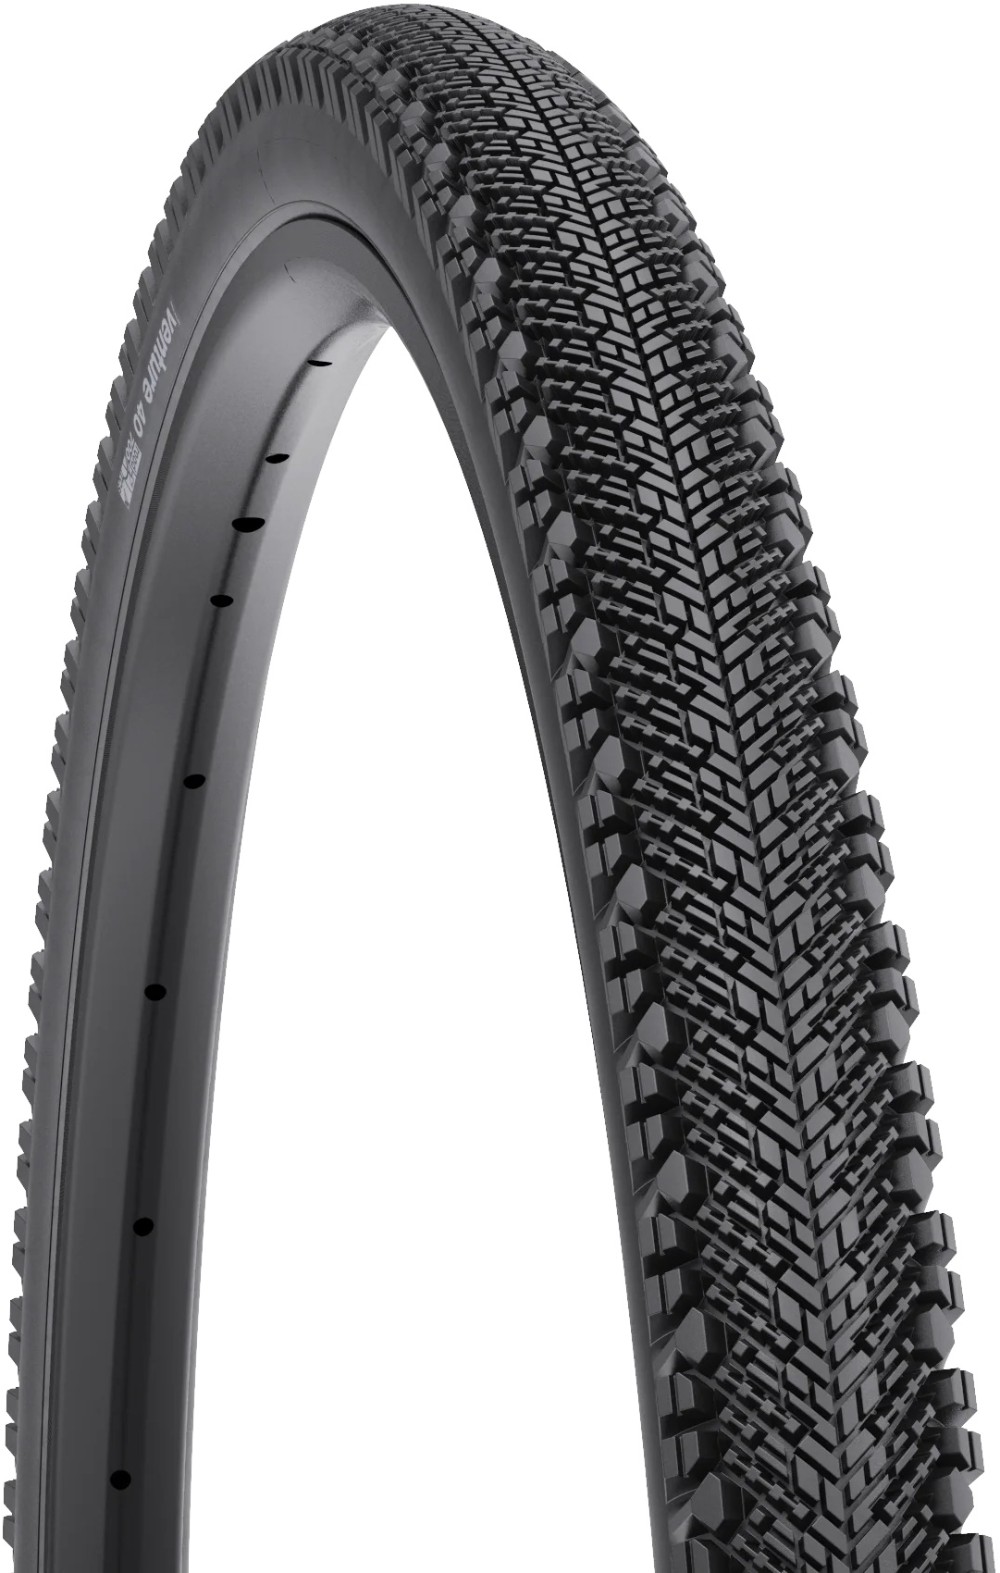 Venture TCS Light/Fast Rolling 120tpi Dual DNA SG2 650B Tyre image 0